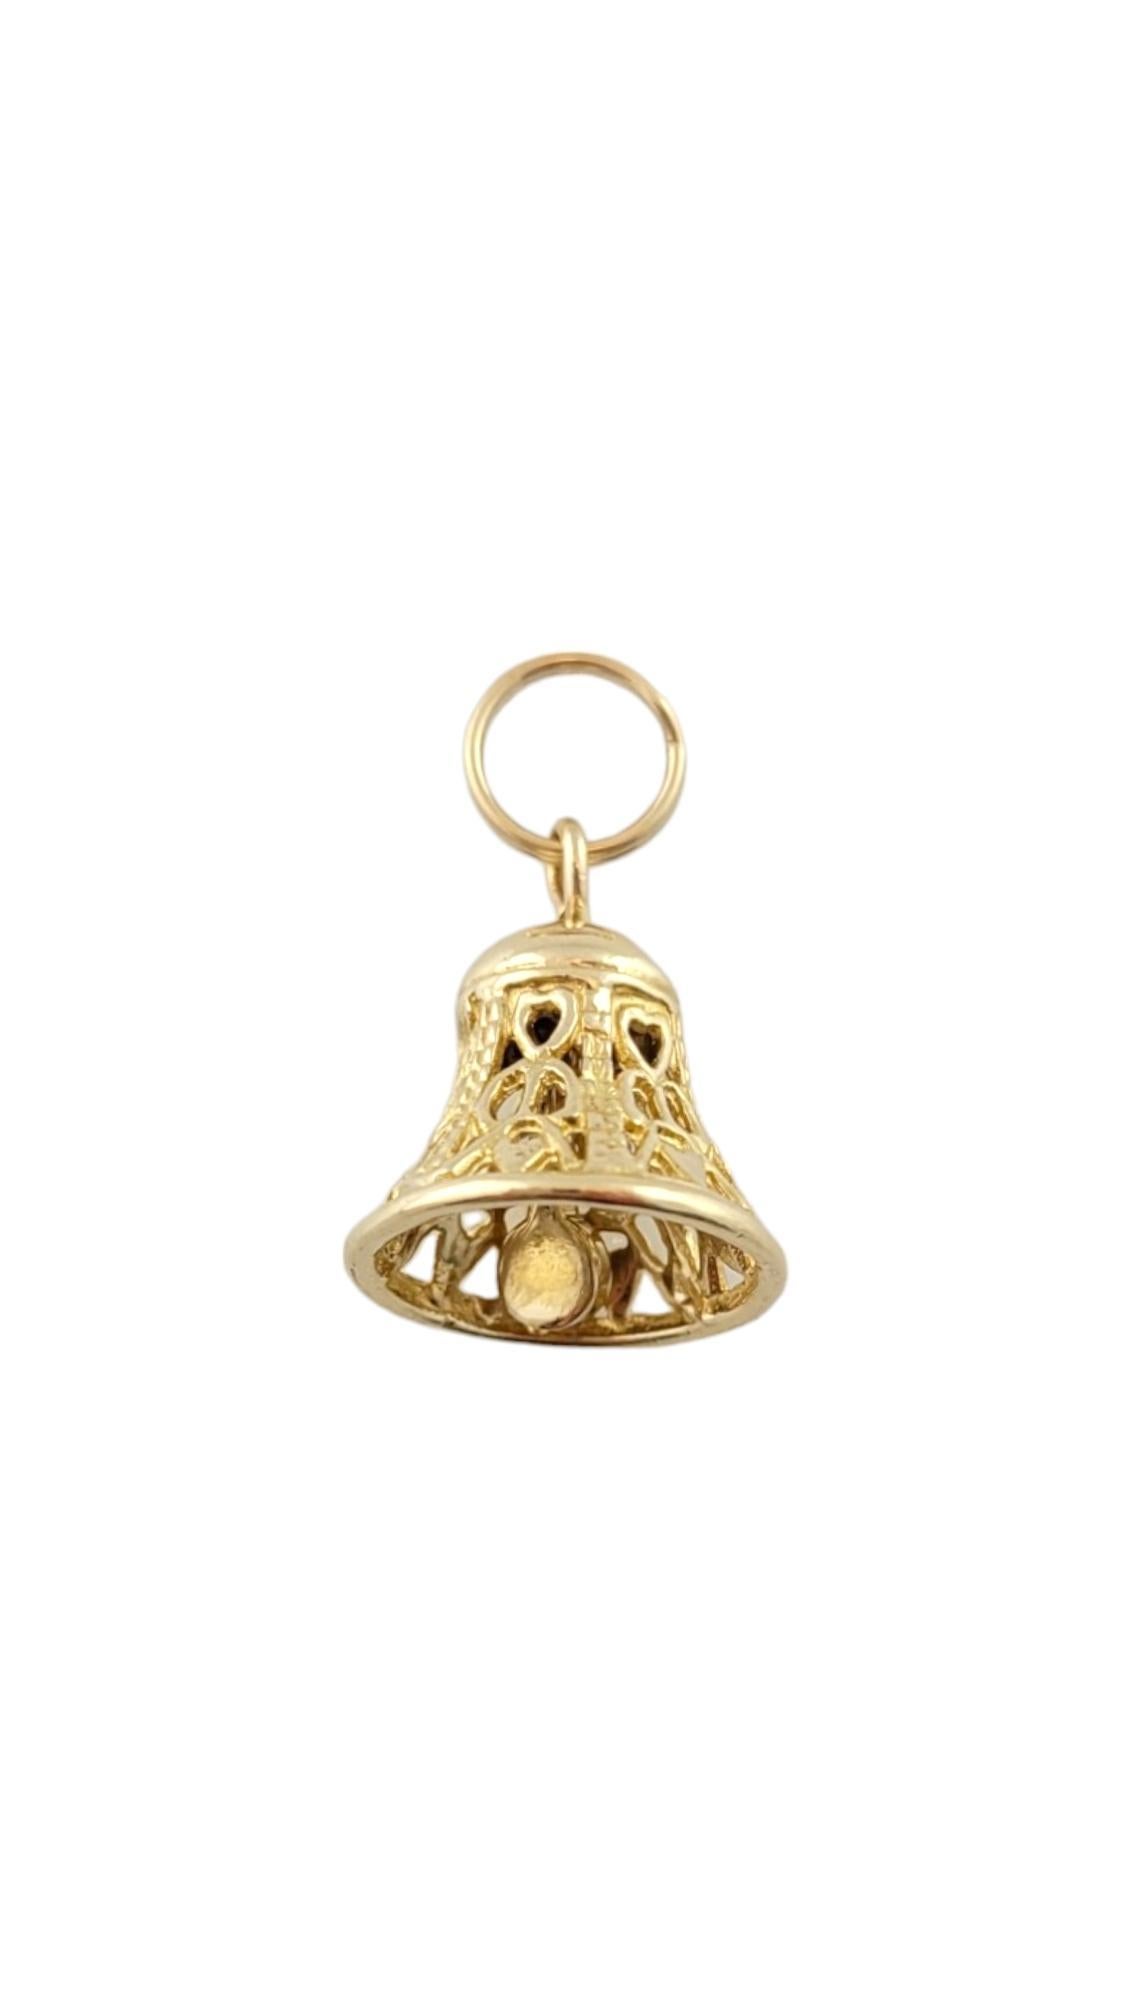 Vintage 14K Yellow Gold Bell Charm- 

This bell charm elegantly dangles and emits a delicate chime with every movement. 

Size: 16.1mm X 14.9mm

Weight: 3.4g/ 2.2 dwt

*Chain not included*

Very good condition, professionally polished.

Will come